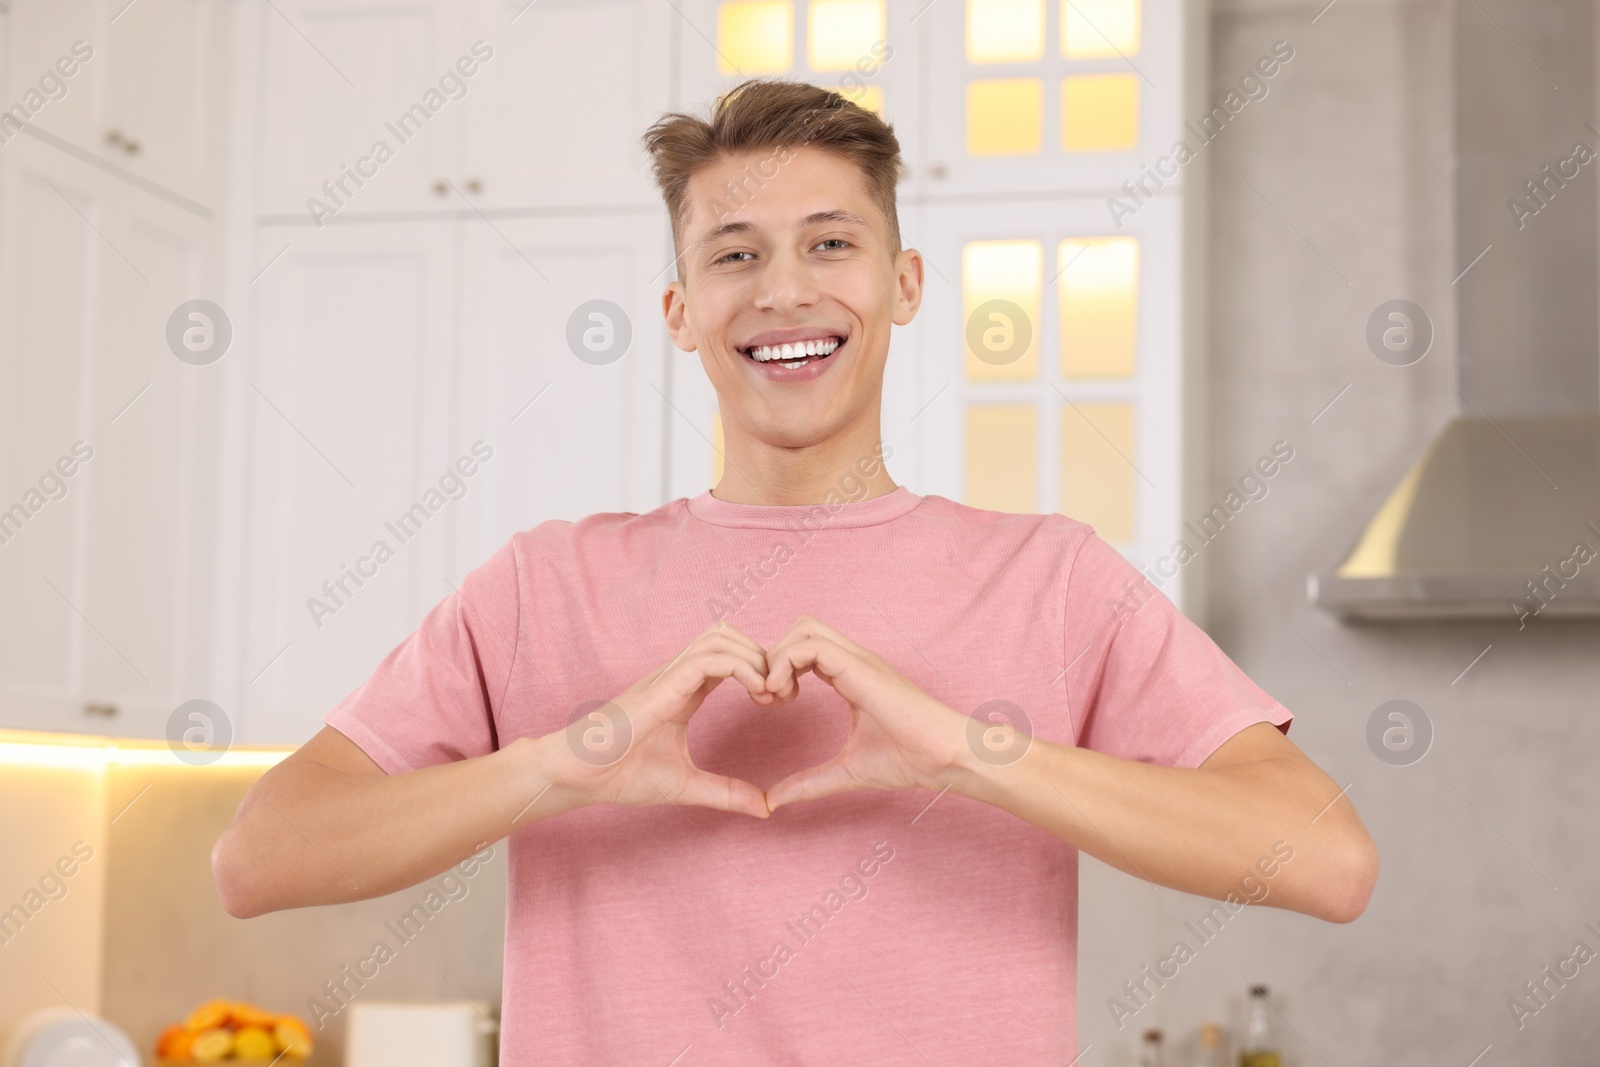 Photo of Happy man showing heart gesture with hands at home